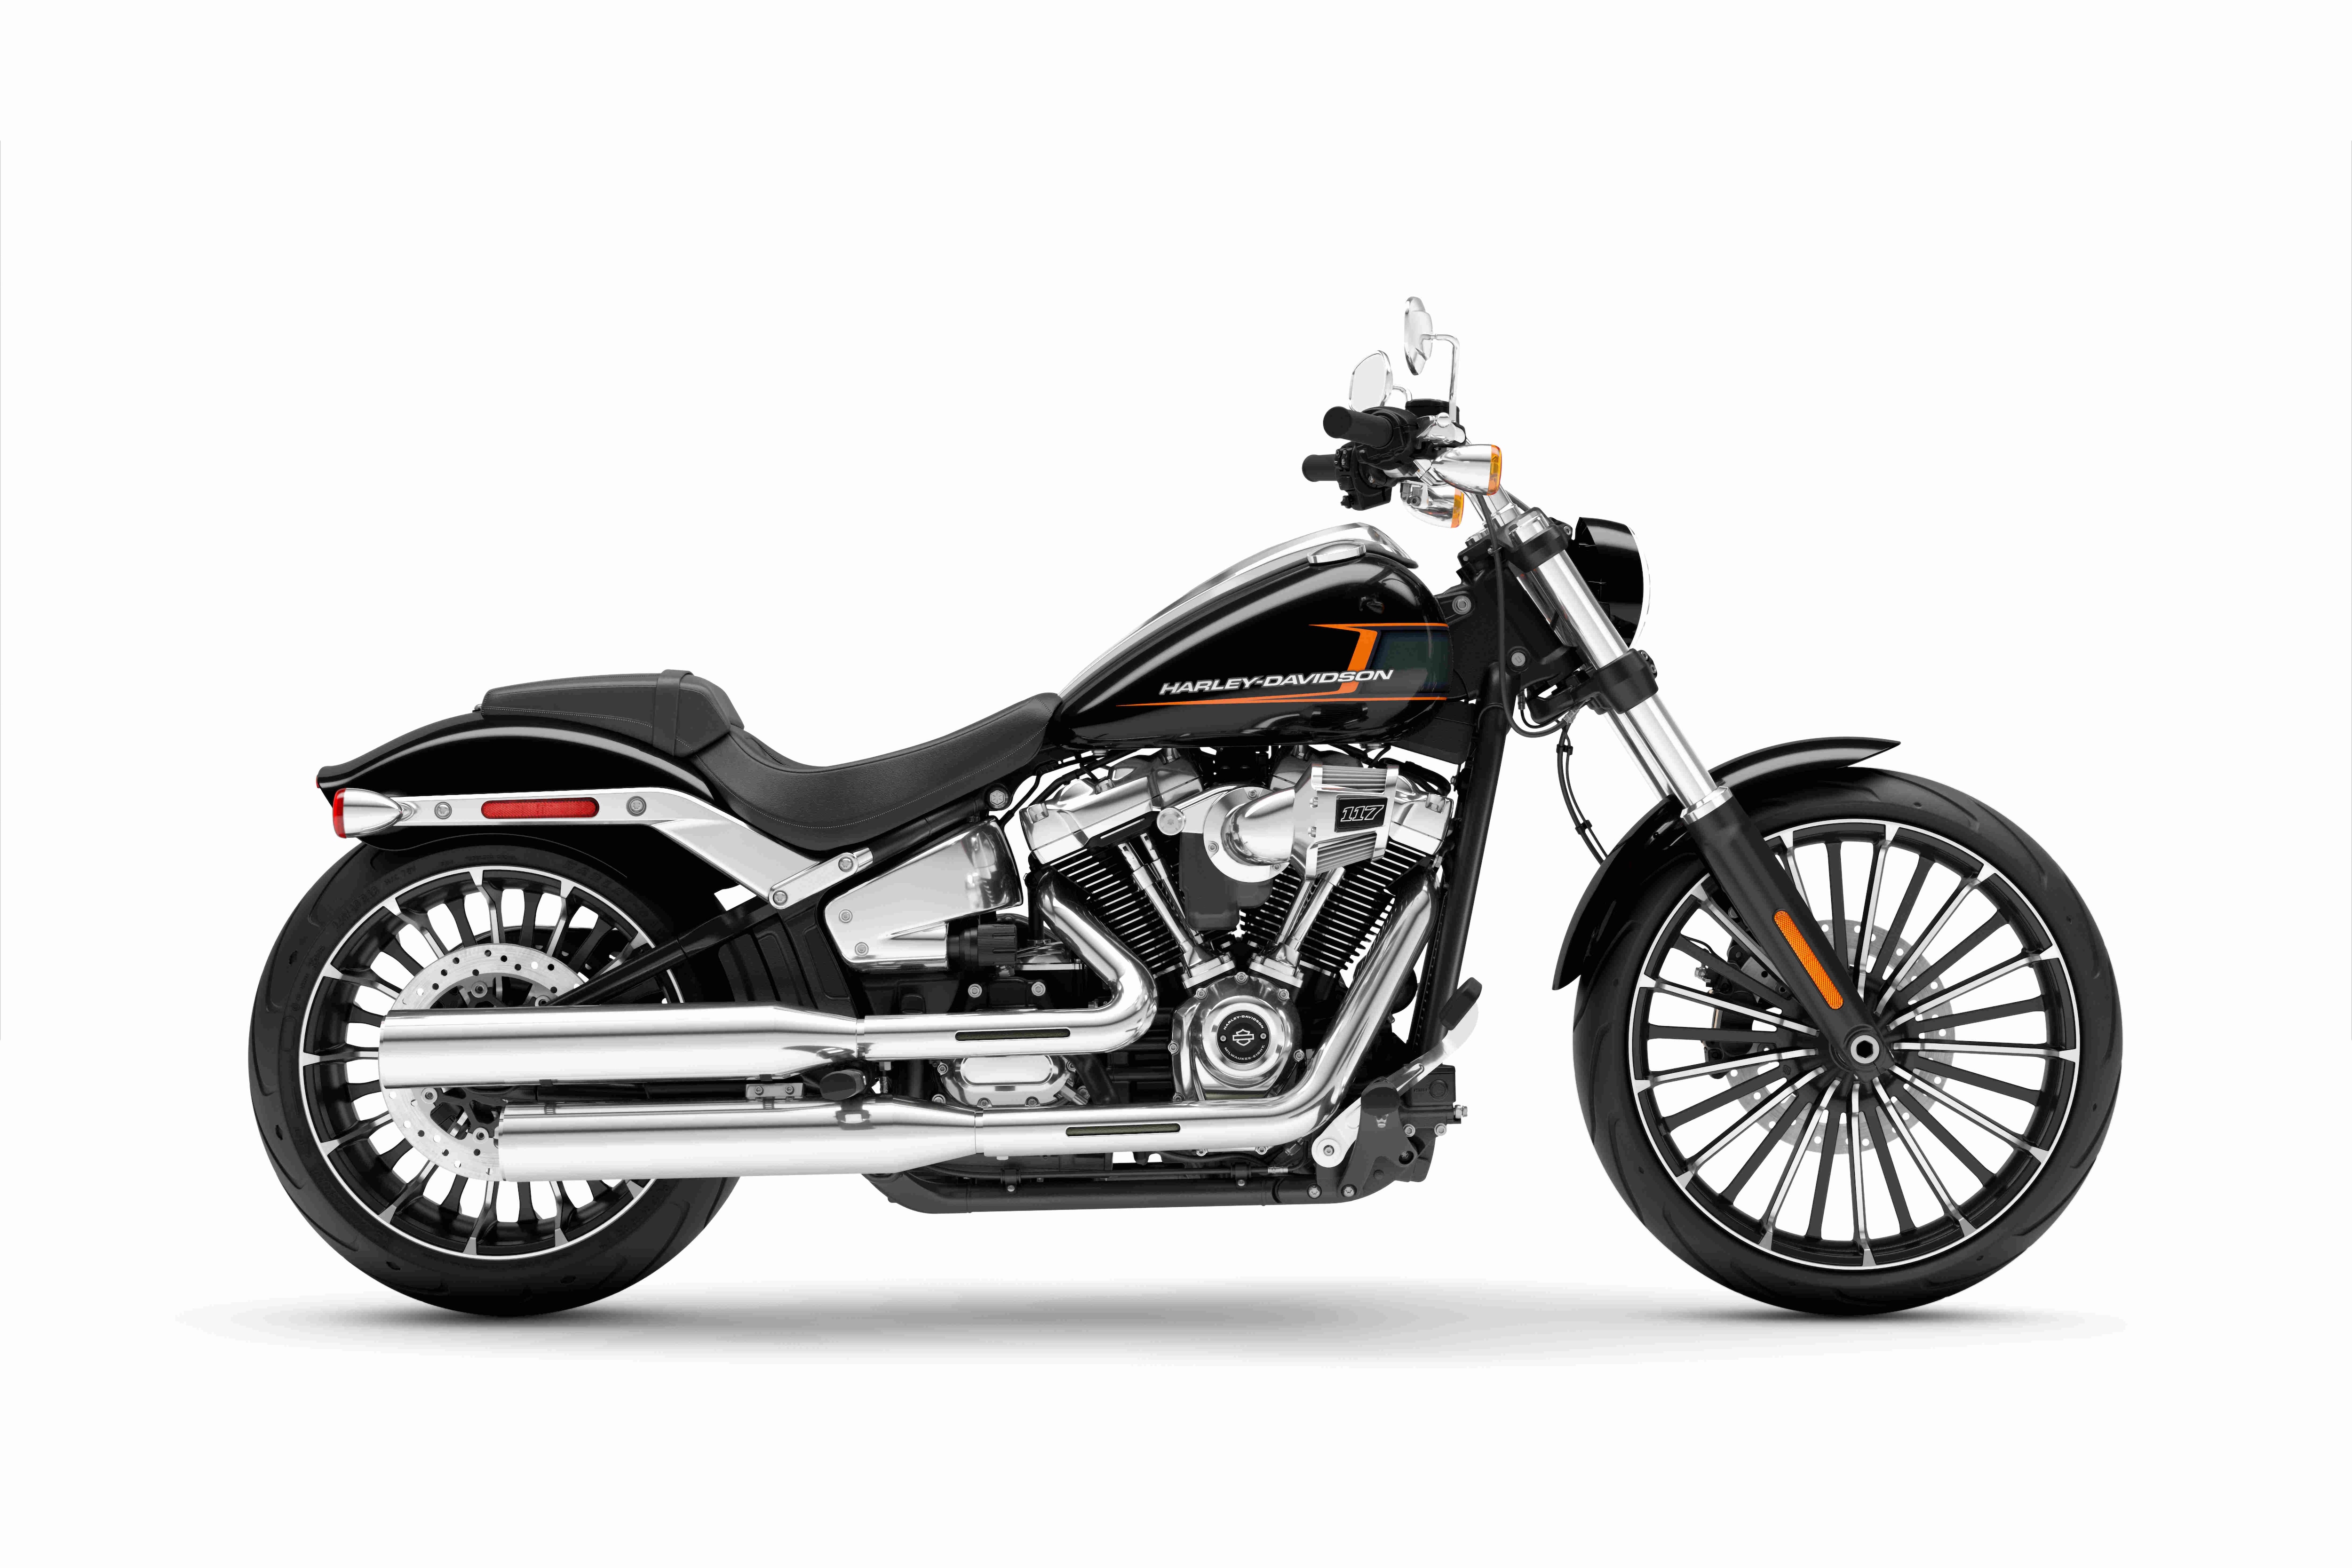 The Harley-Davidson Breakout returns to India after a decade